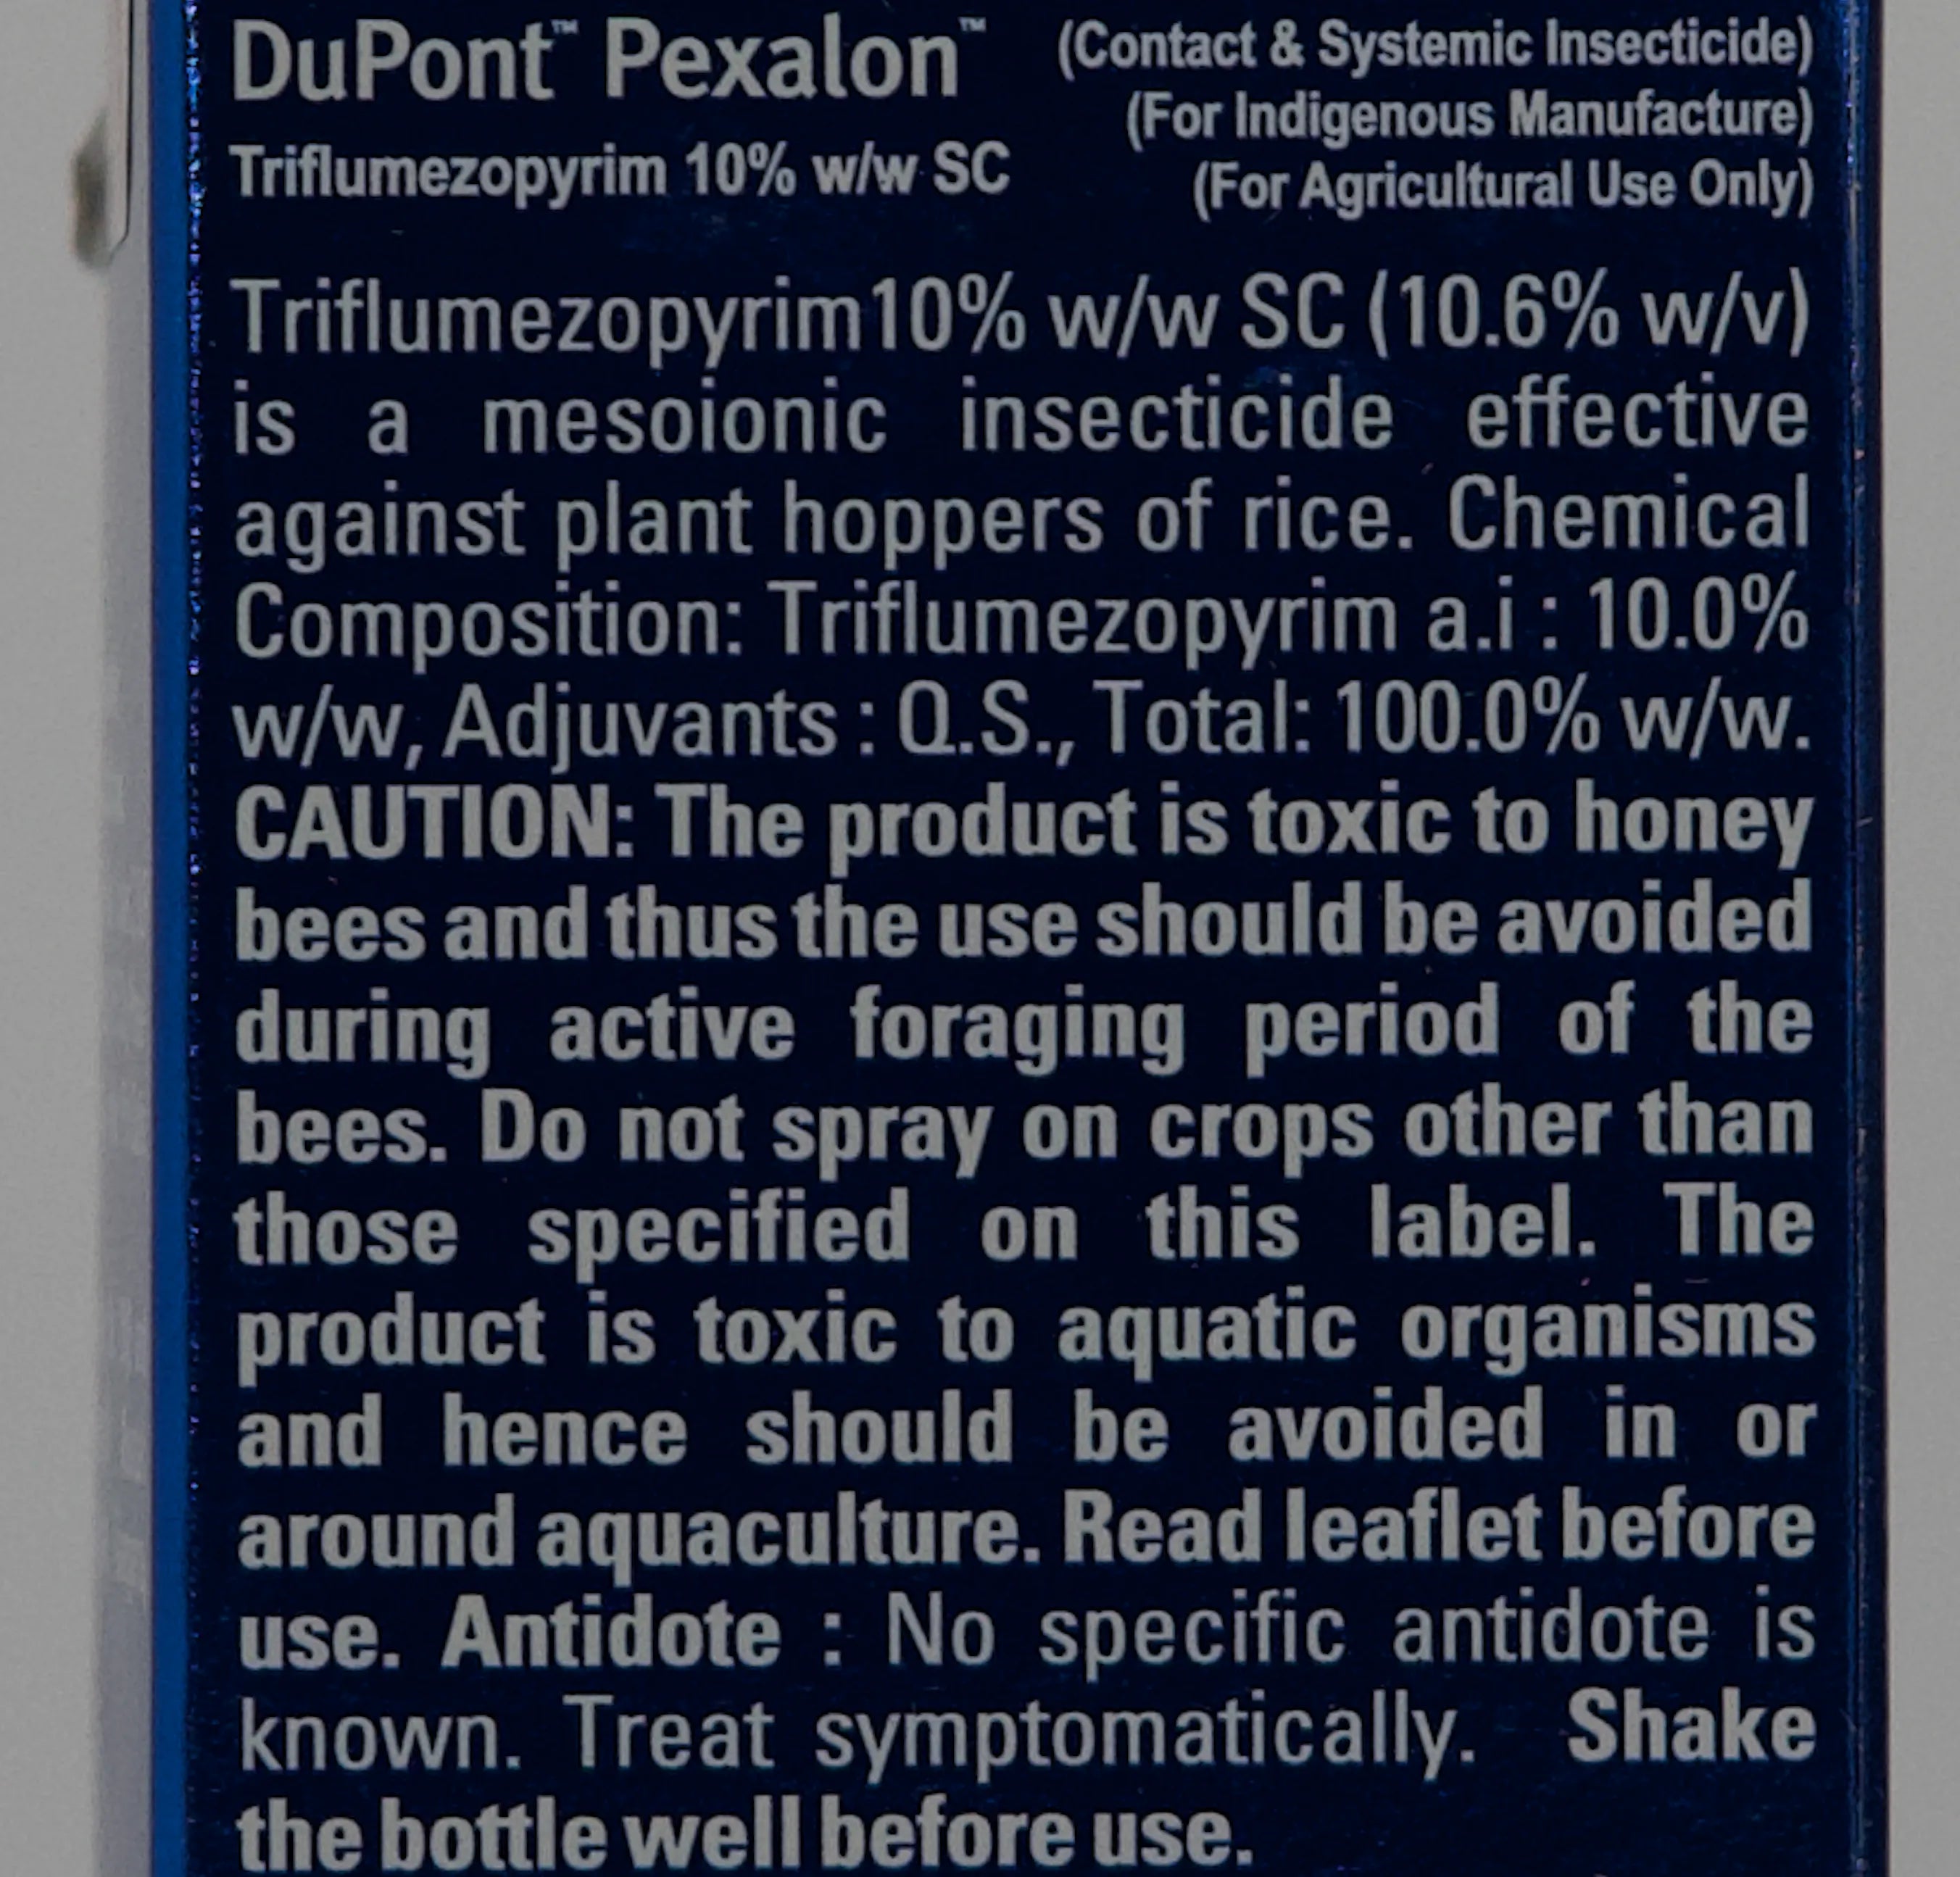 Pexalon Insecticide product  Image 4